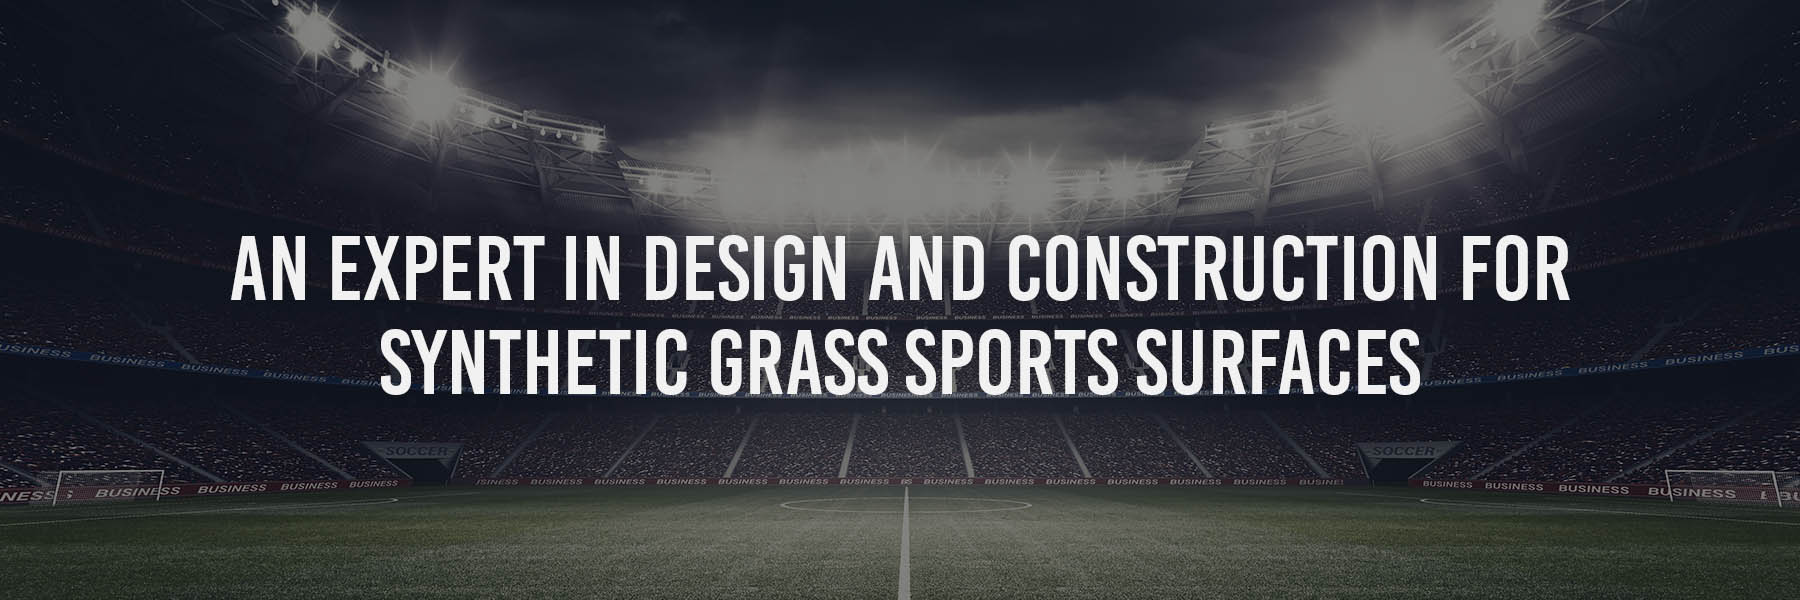 Synthetic Grass Sports Surfaces